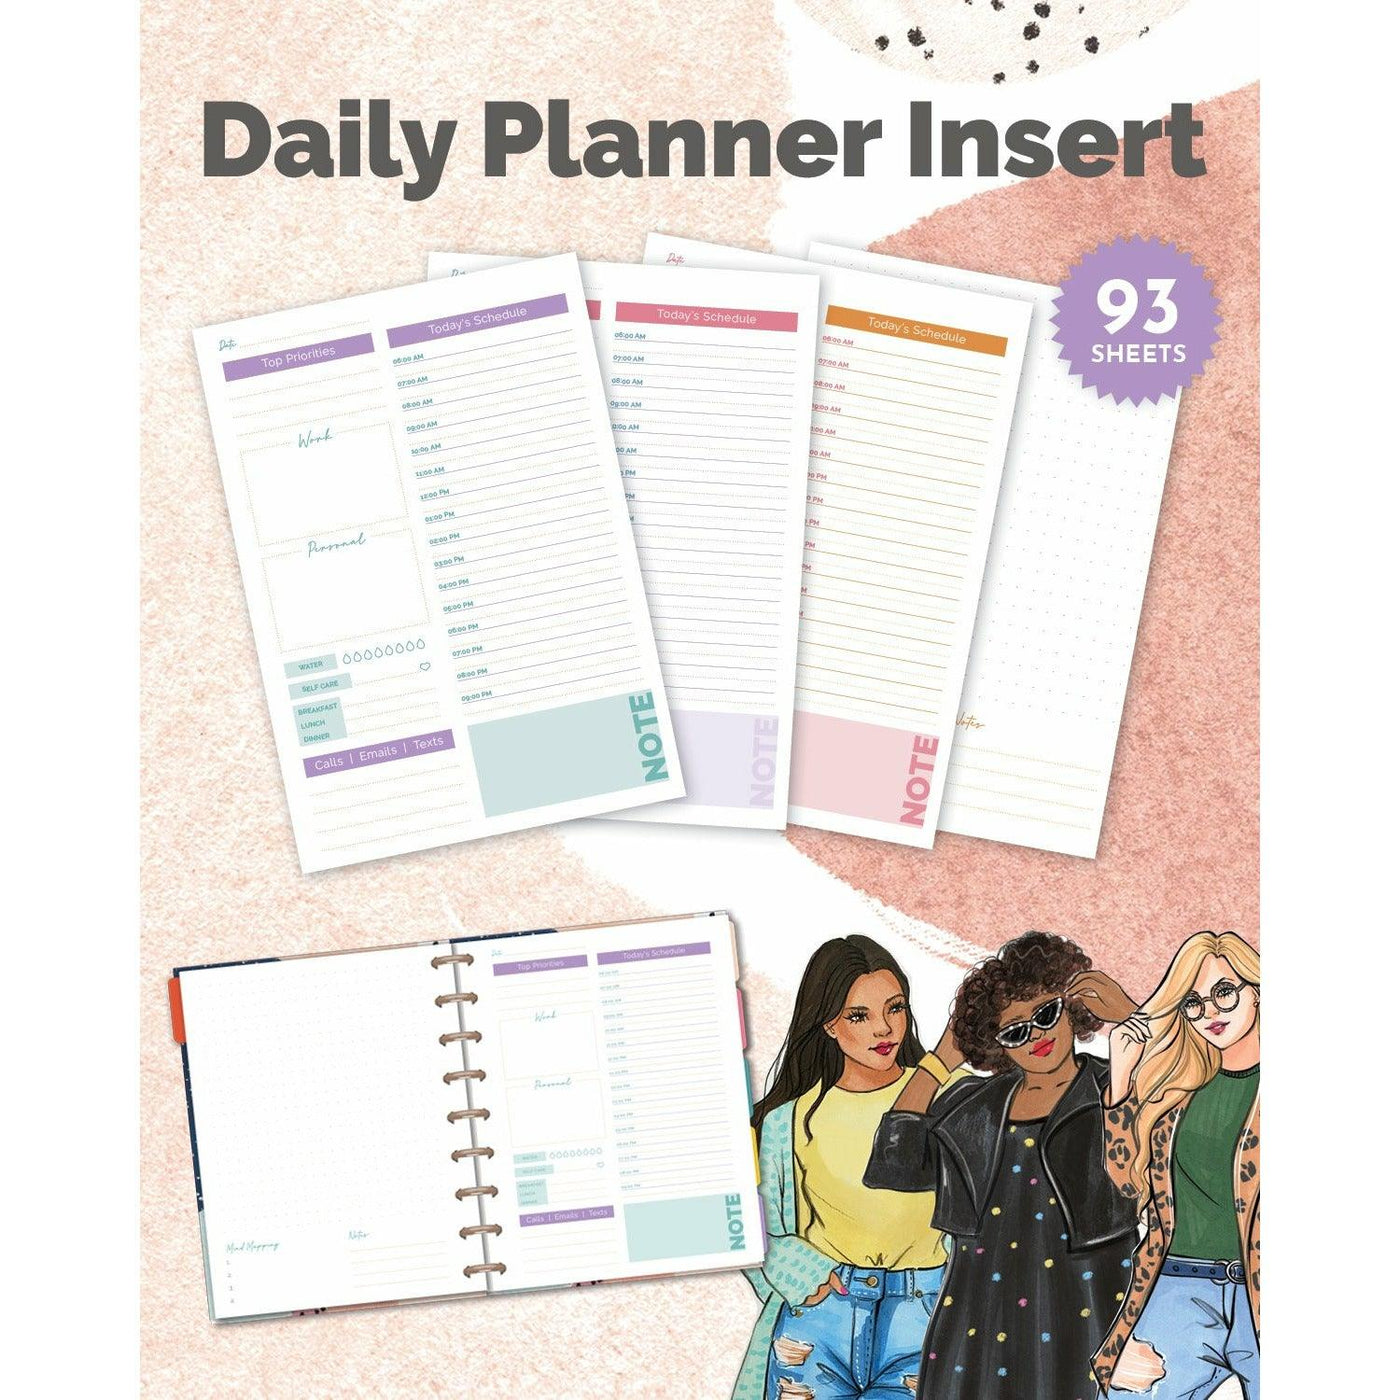 DAILY PLANNER INSERT - CLASSIC SIZE - QUARTERLY SUPPLY by Rongrong DeVoe